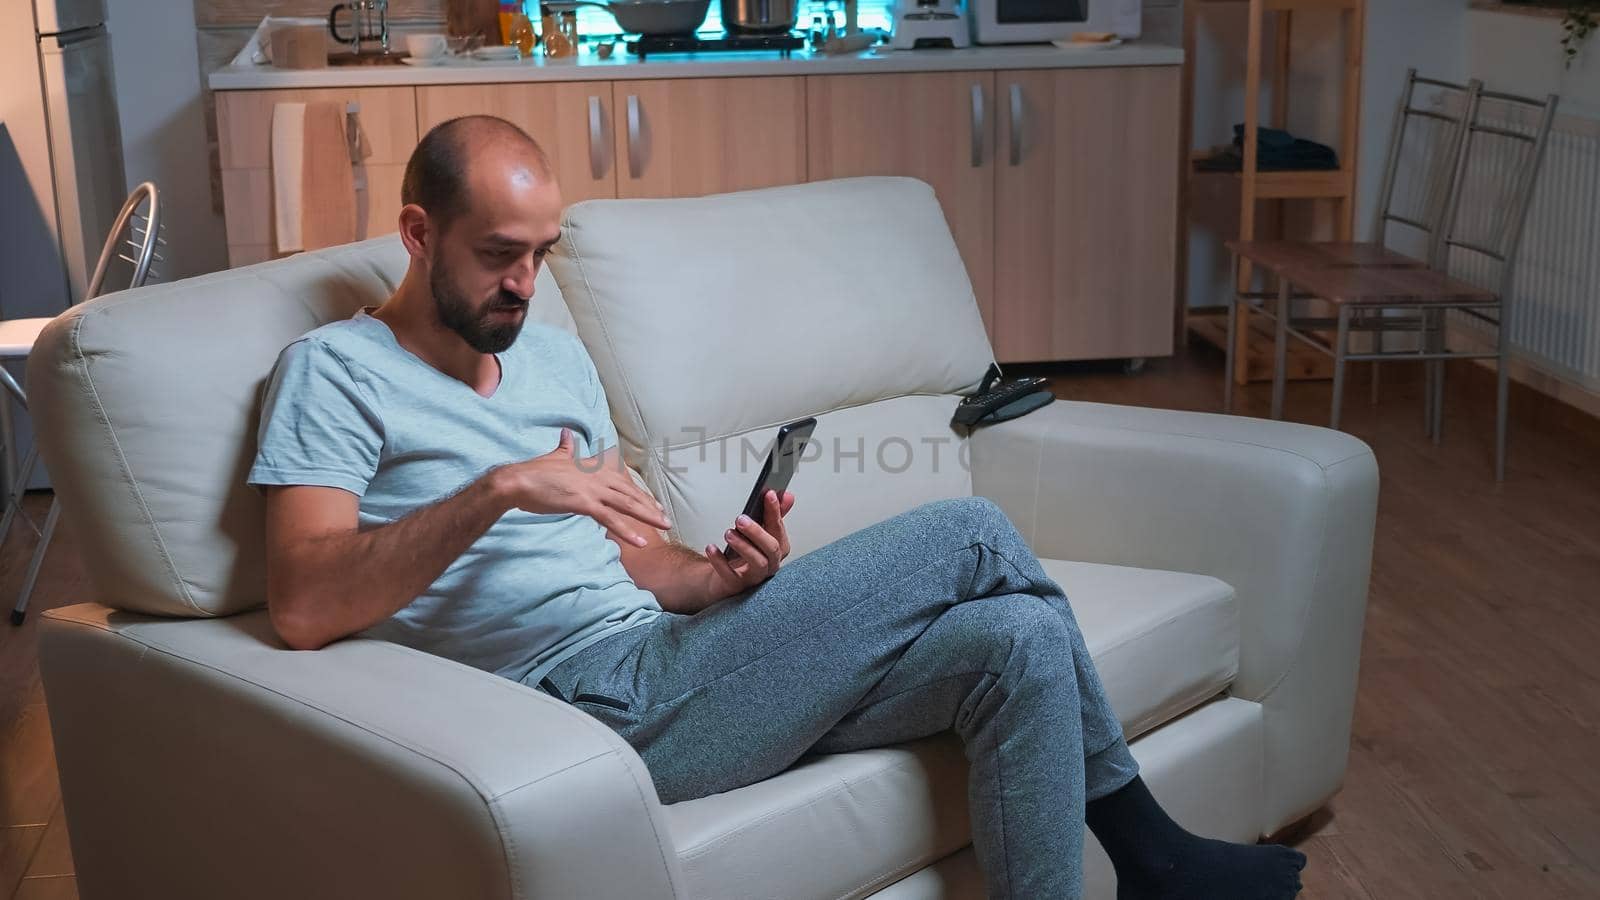 Focused adult talking with friends about social media connection using modern smartphone while sitting on couch. Tired man working late at night in kitchen using modern technology wireless